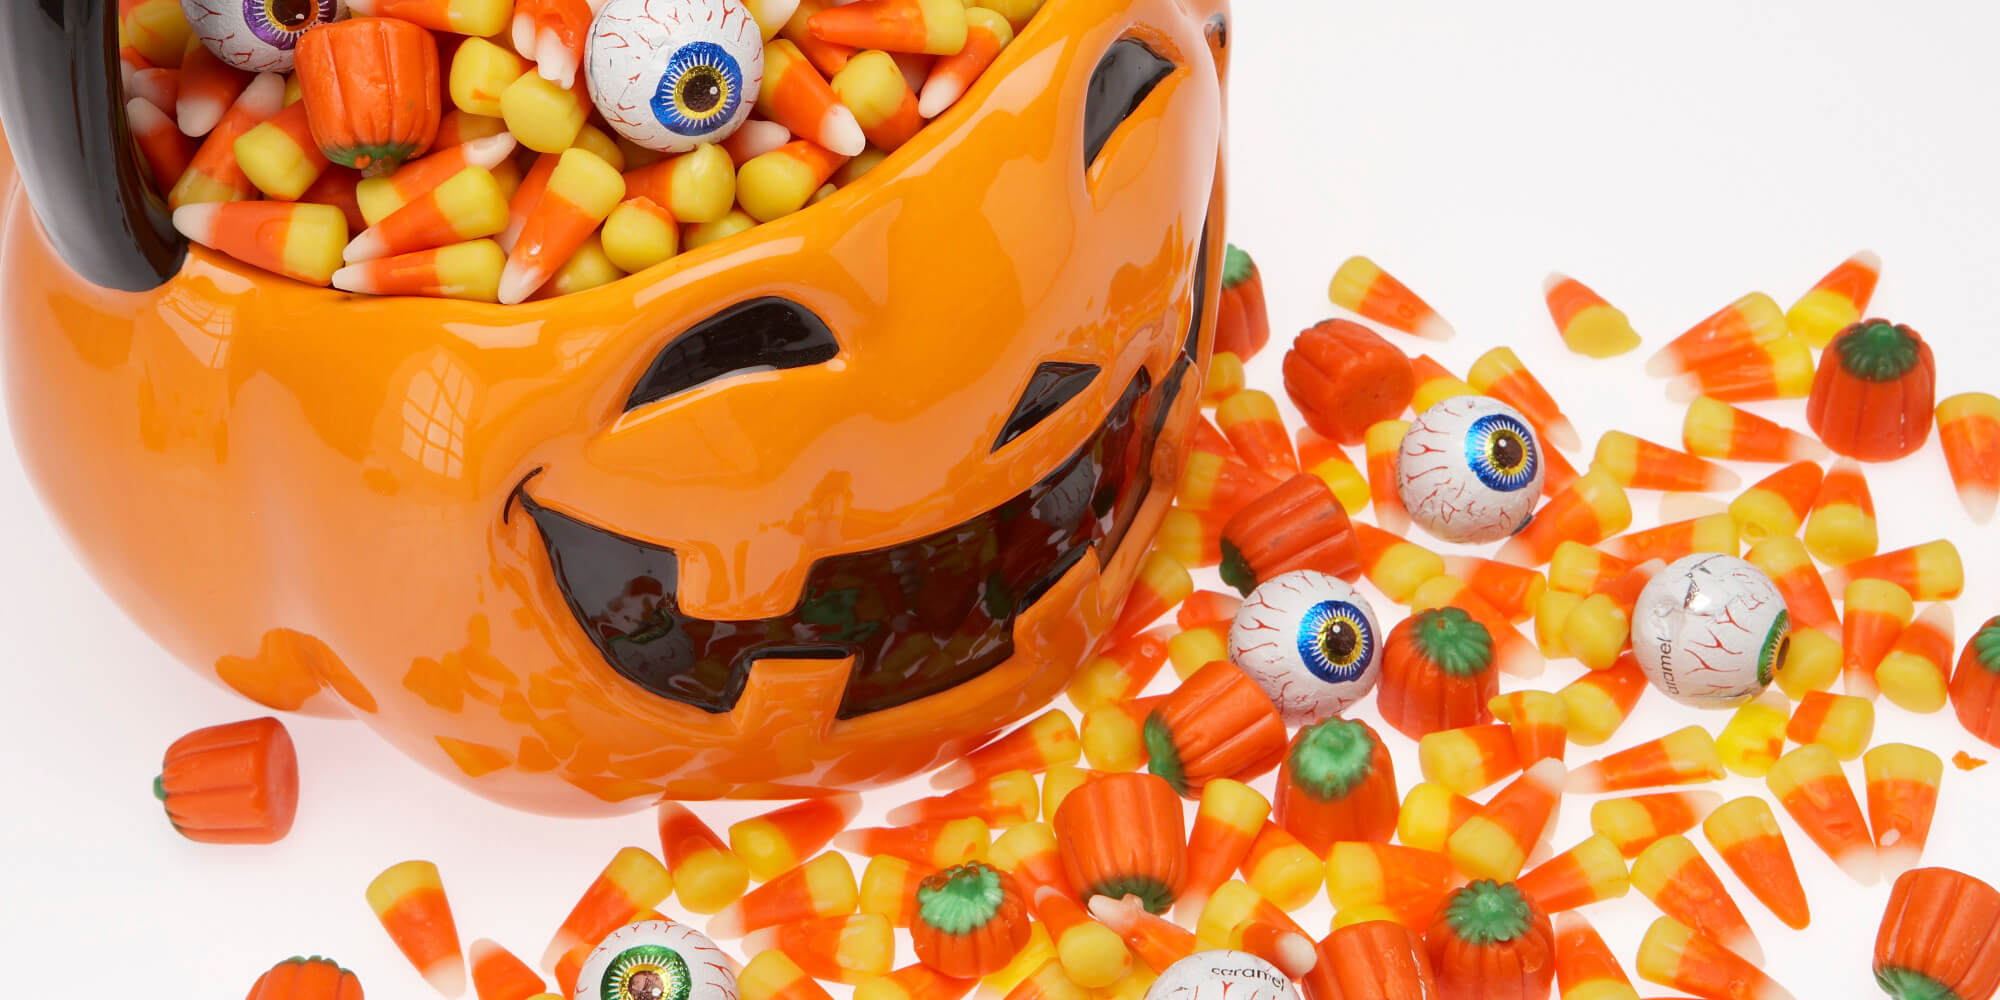 Halloween Basket Overflowing With Candy Corn